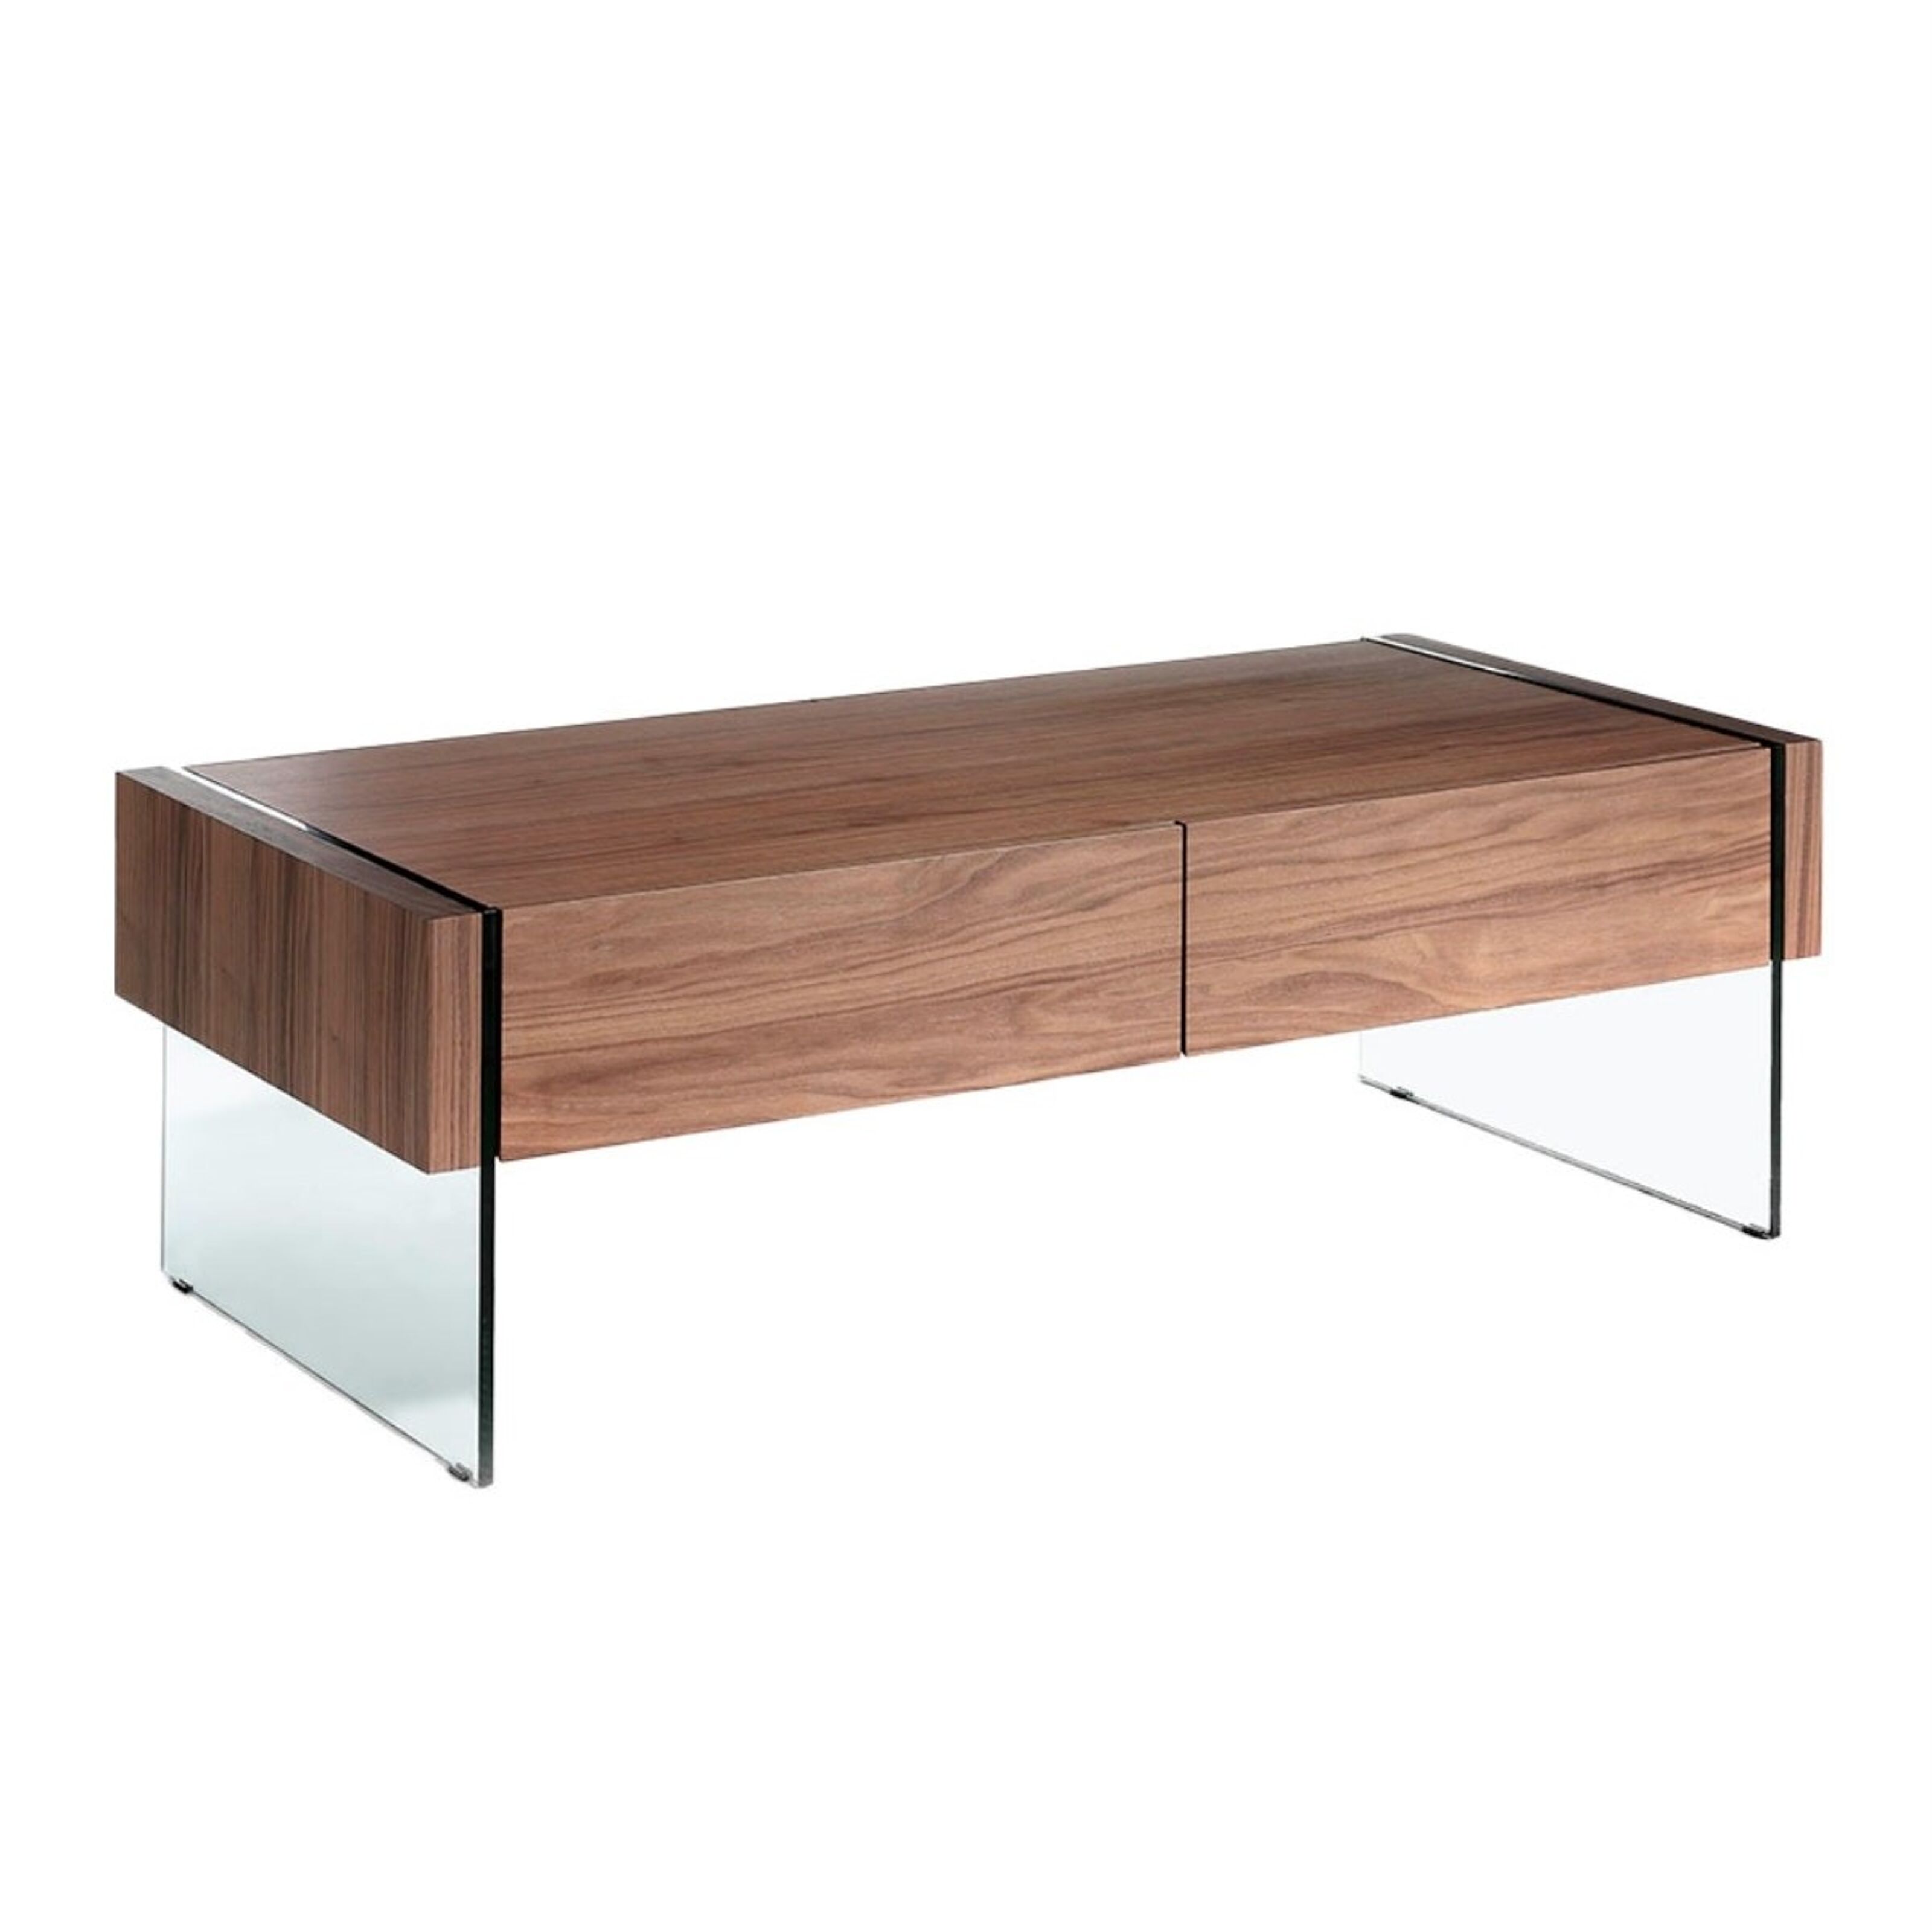 Buy wholesale Walnut glass wood tempered model veneered drawers, and table 2050 with center sides